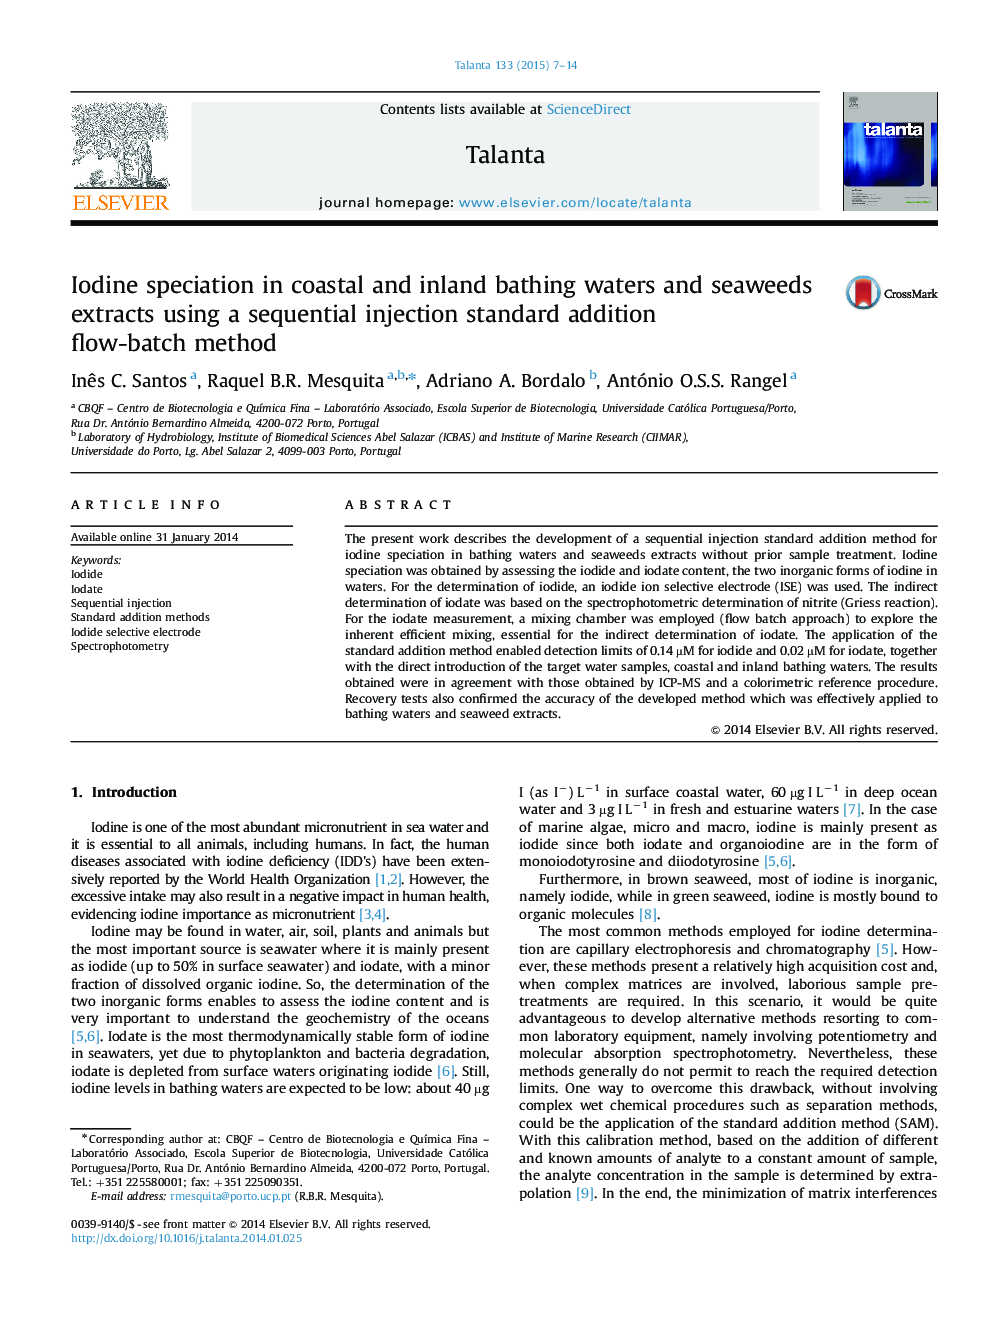 Iodine speciation in coastal and inland bathing waters and seaweeds extracts using a sequential injection standard addition flow-batch method